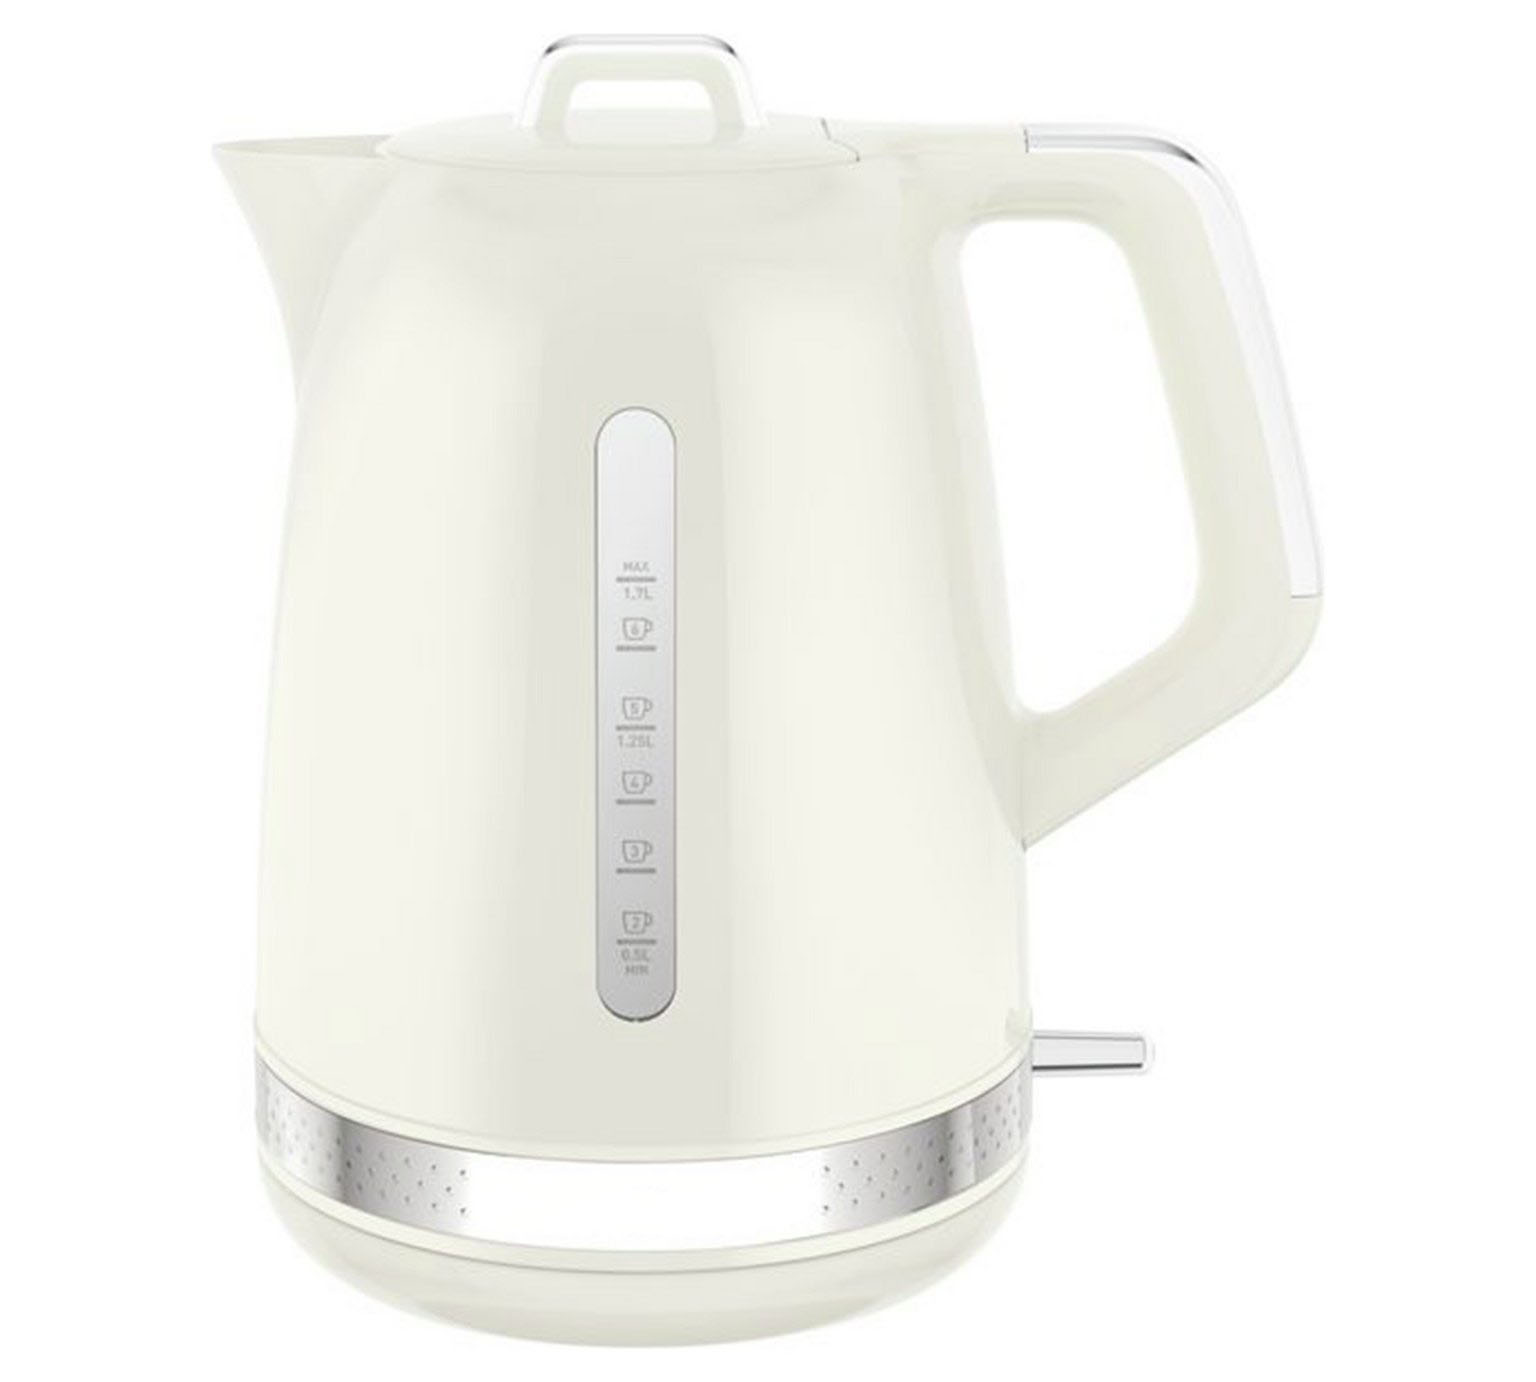 BY320A40 Kettle - Ivory